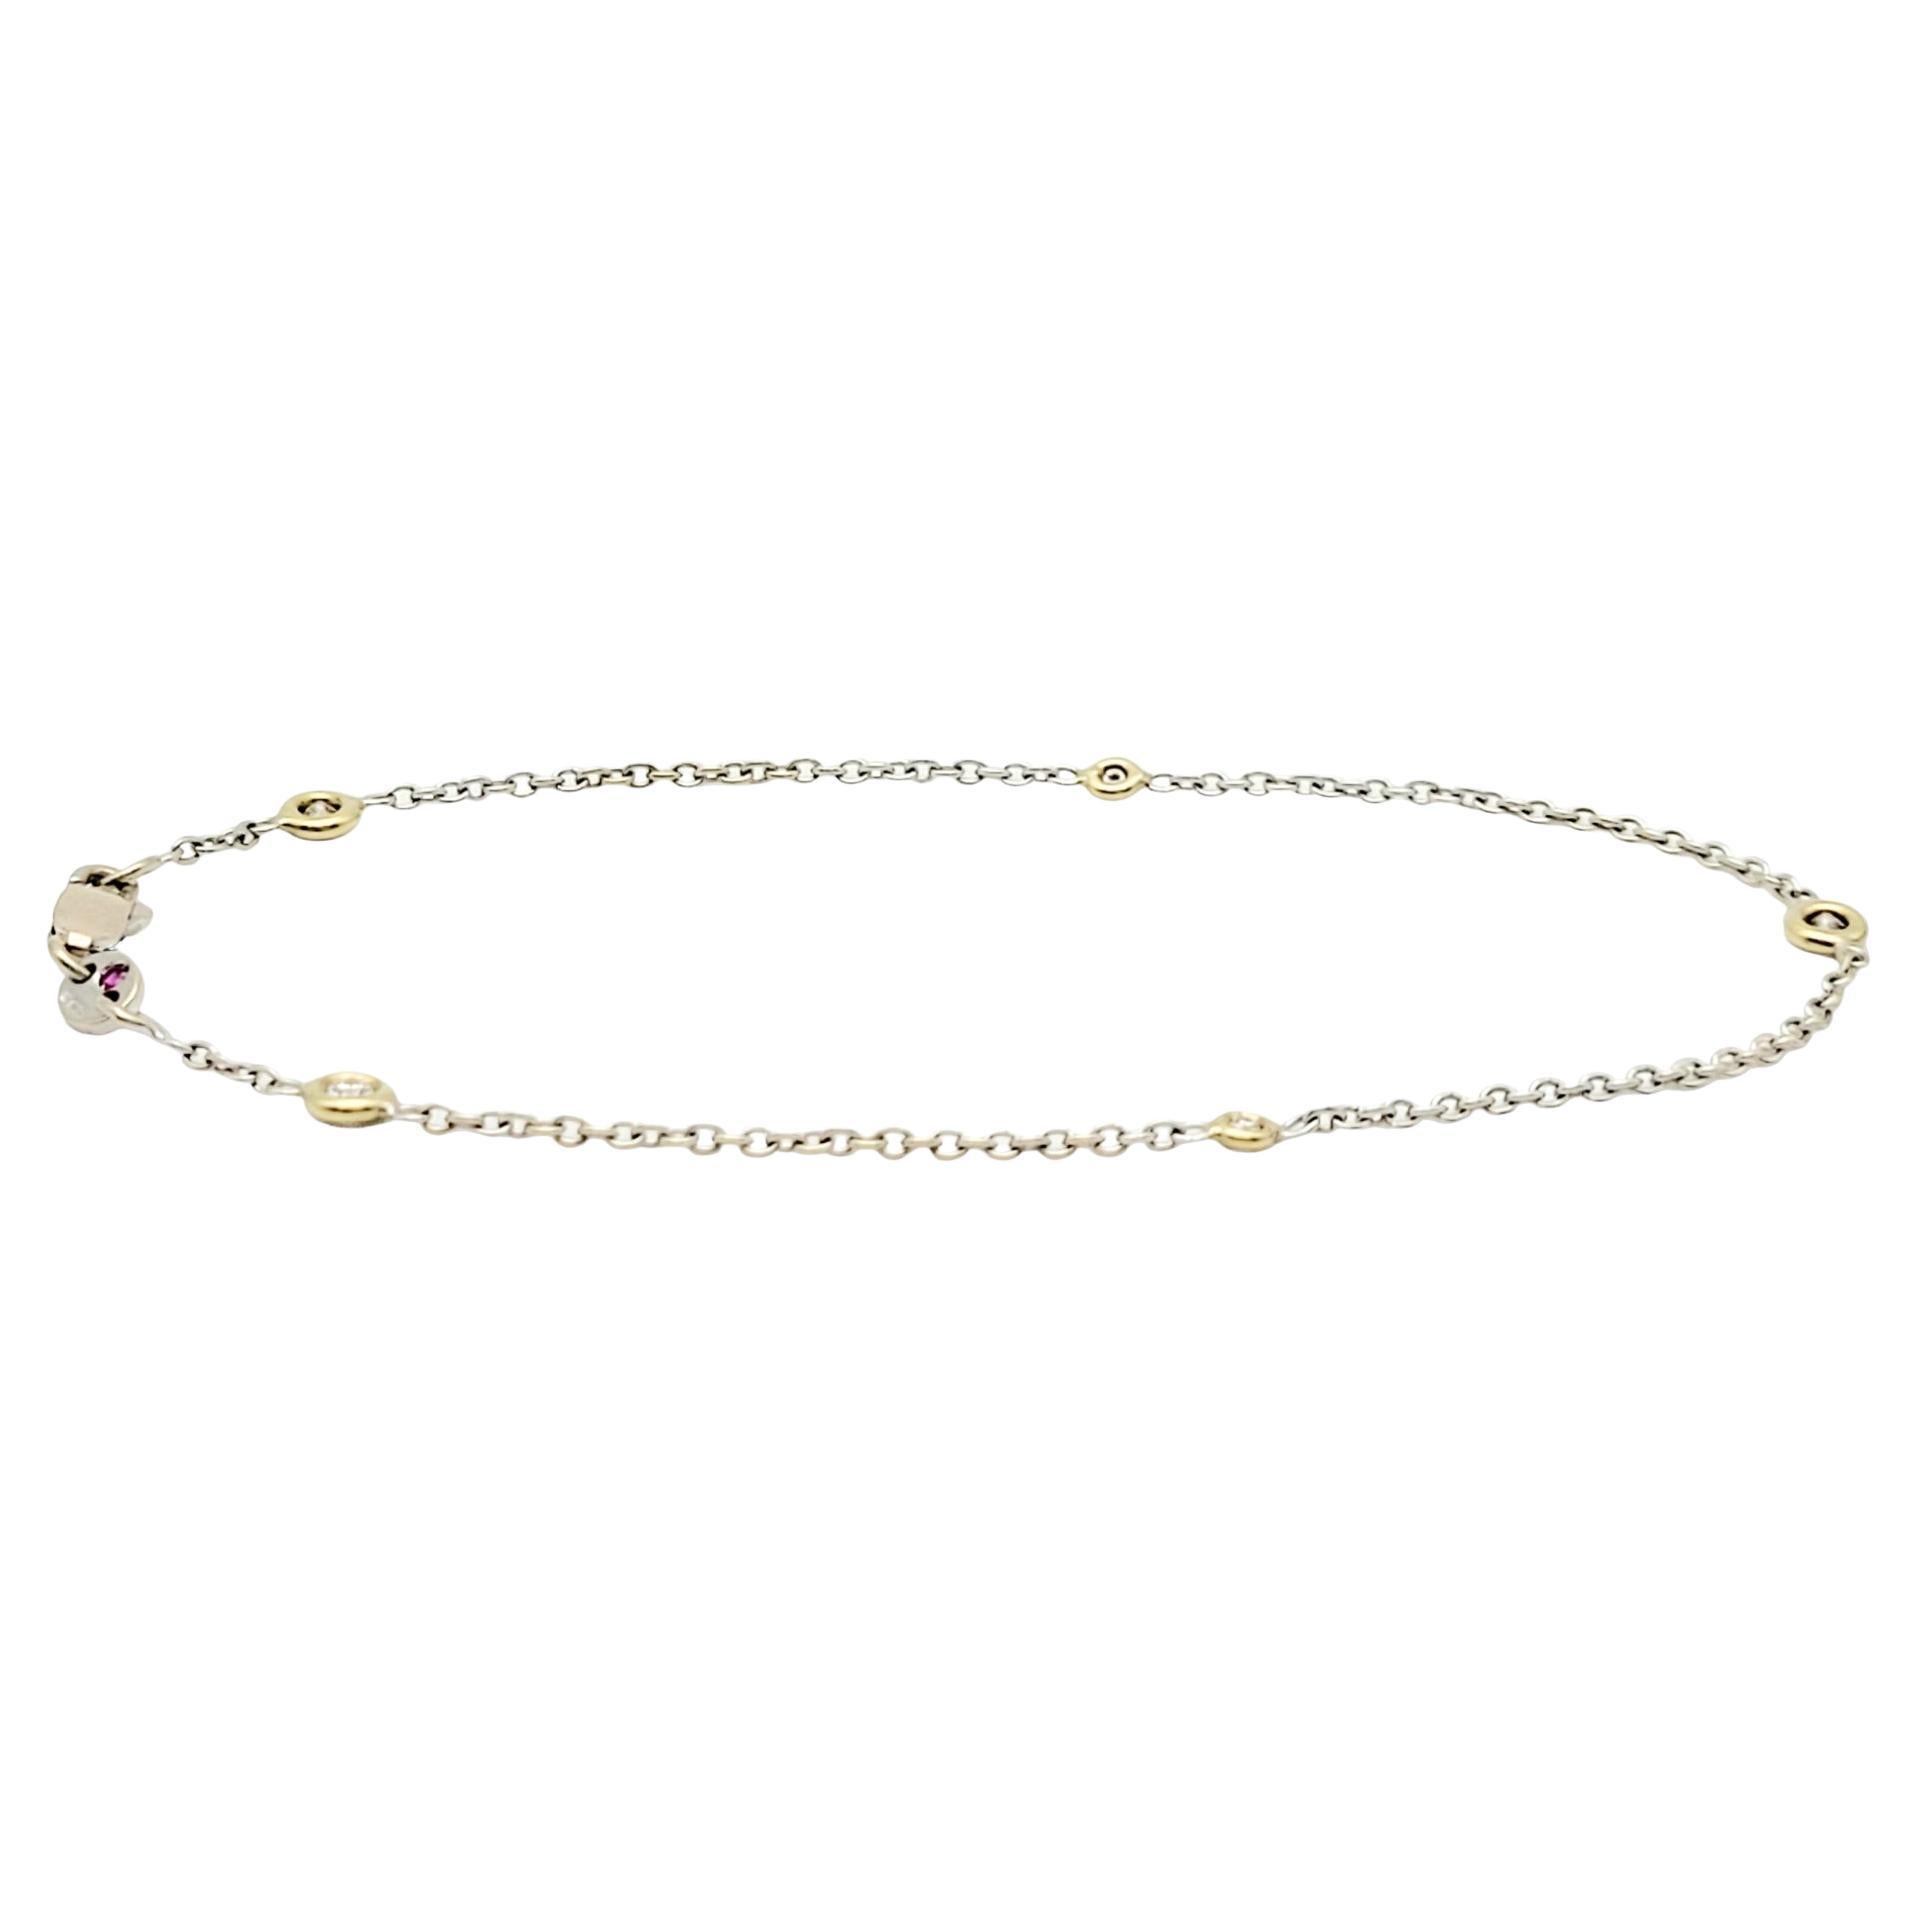 This Roberto Coin Diamond By the Inch station chain bracelet is a beautiful adornment for any jewelry collection. This delicately designed piece features a dainty cable chain crafted in white gold, exuding a refined and timeless allure. The